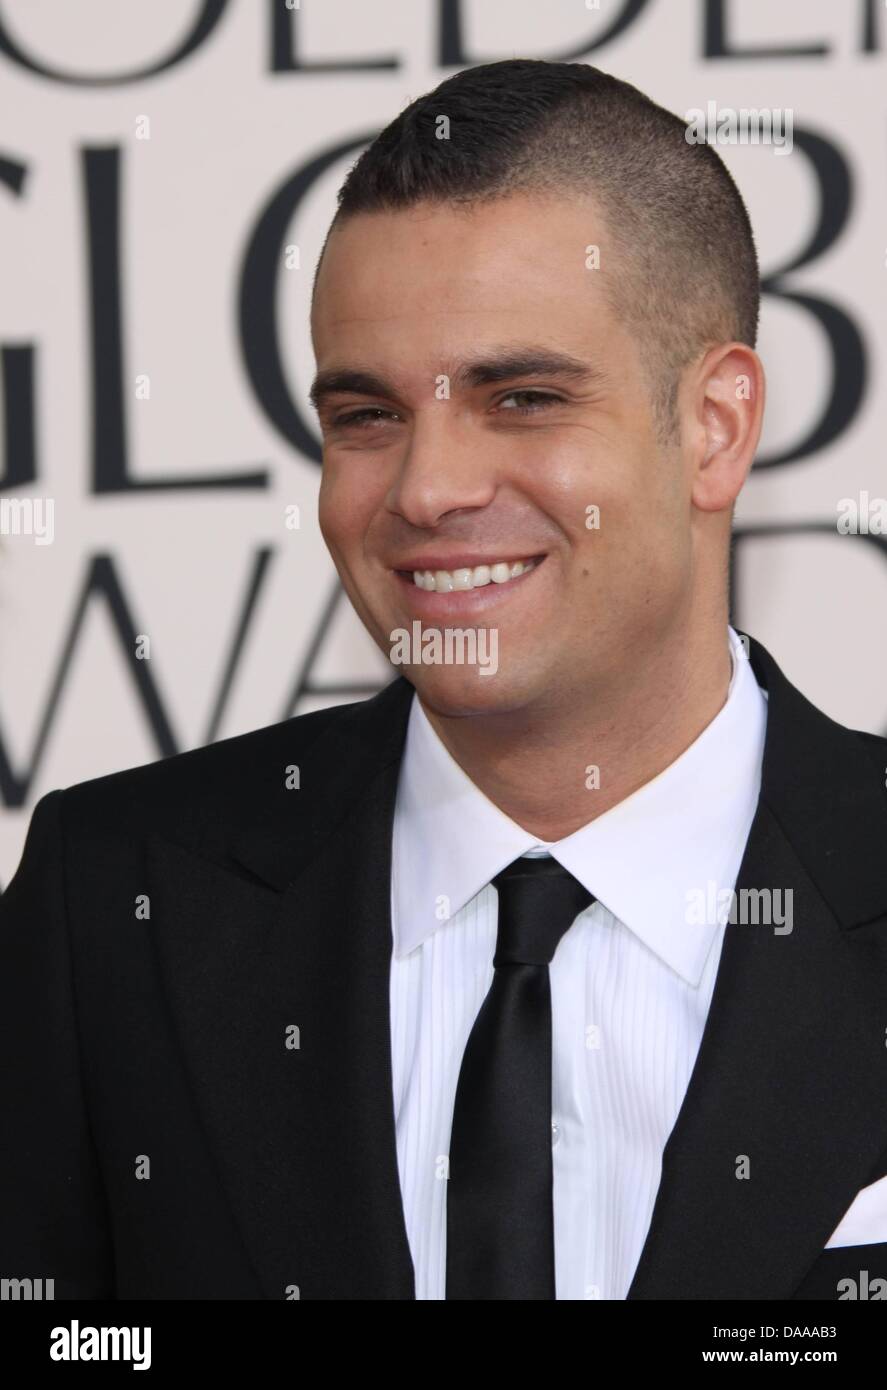 US actor Mark Salling arrives at the 68th Golden Globe Awards presented by the Hollywood Foreign Press Association at Hotel Beverly Hilton in Beverly Hills, Los Angeles, USA, 16 January 2011. Photo: Louis Garcia Stock Photo